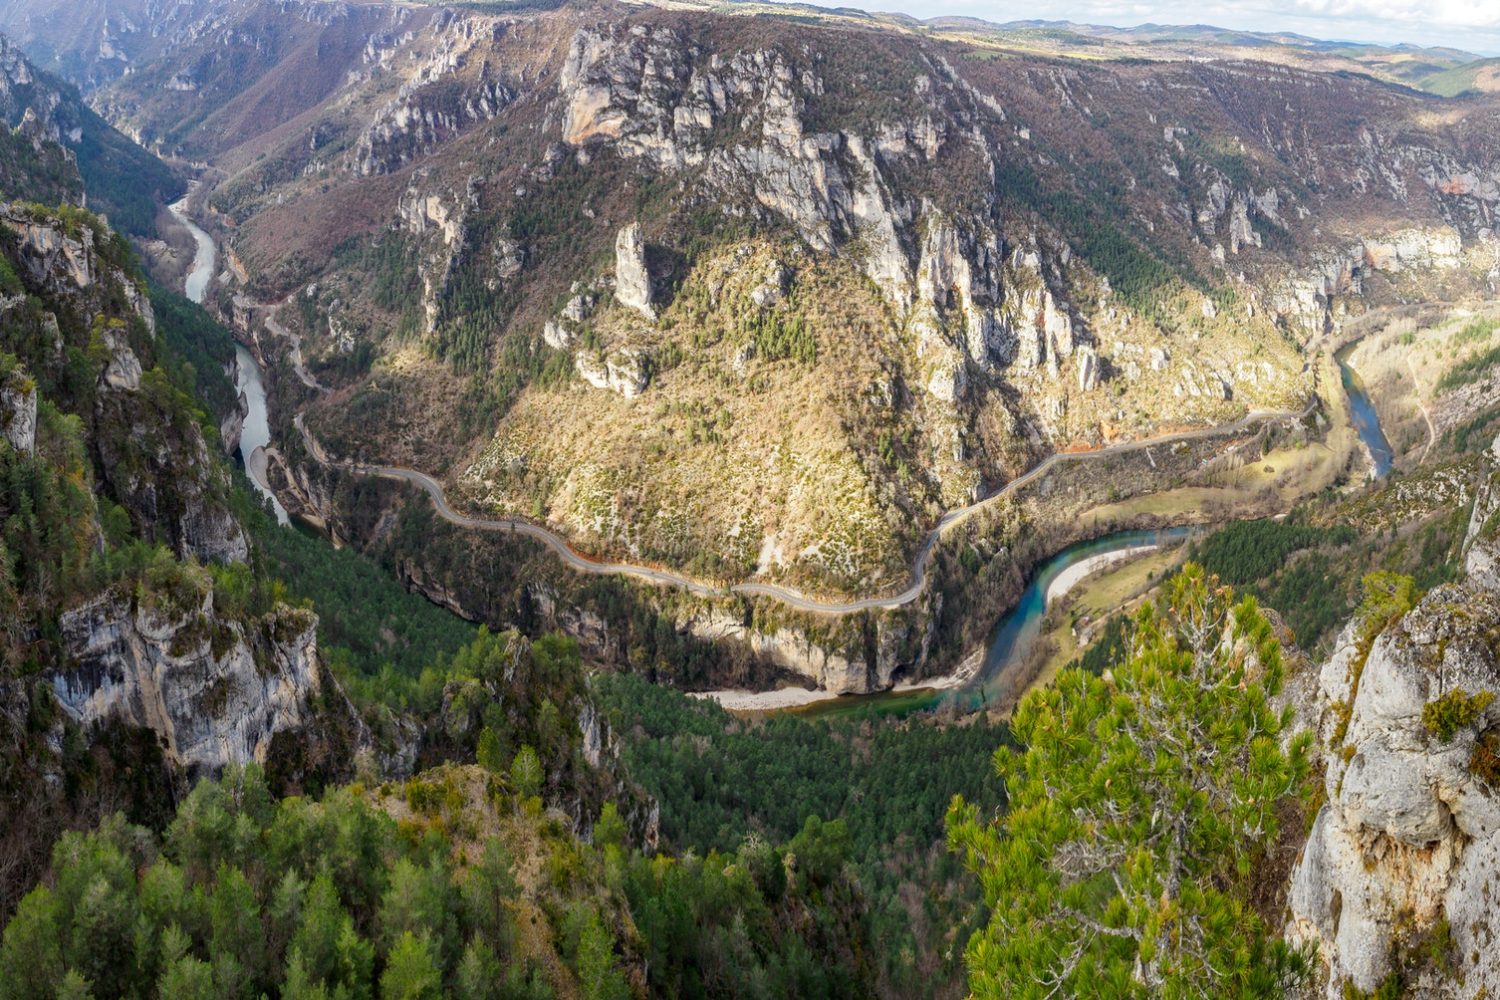 Tarn river gorge from Hourtous rock, Rieisse, France